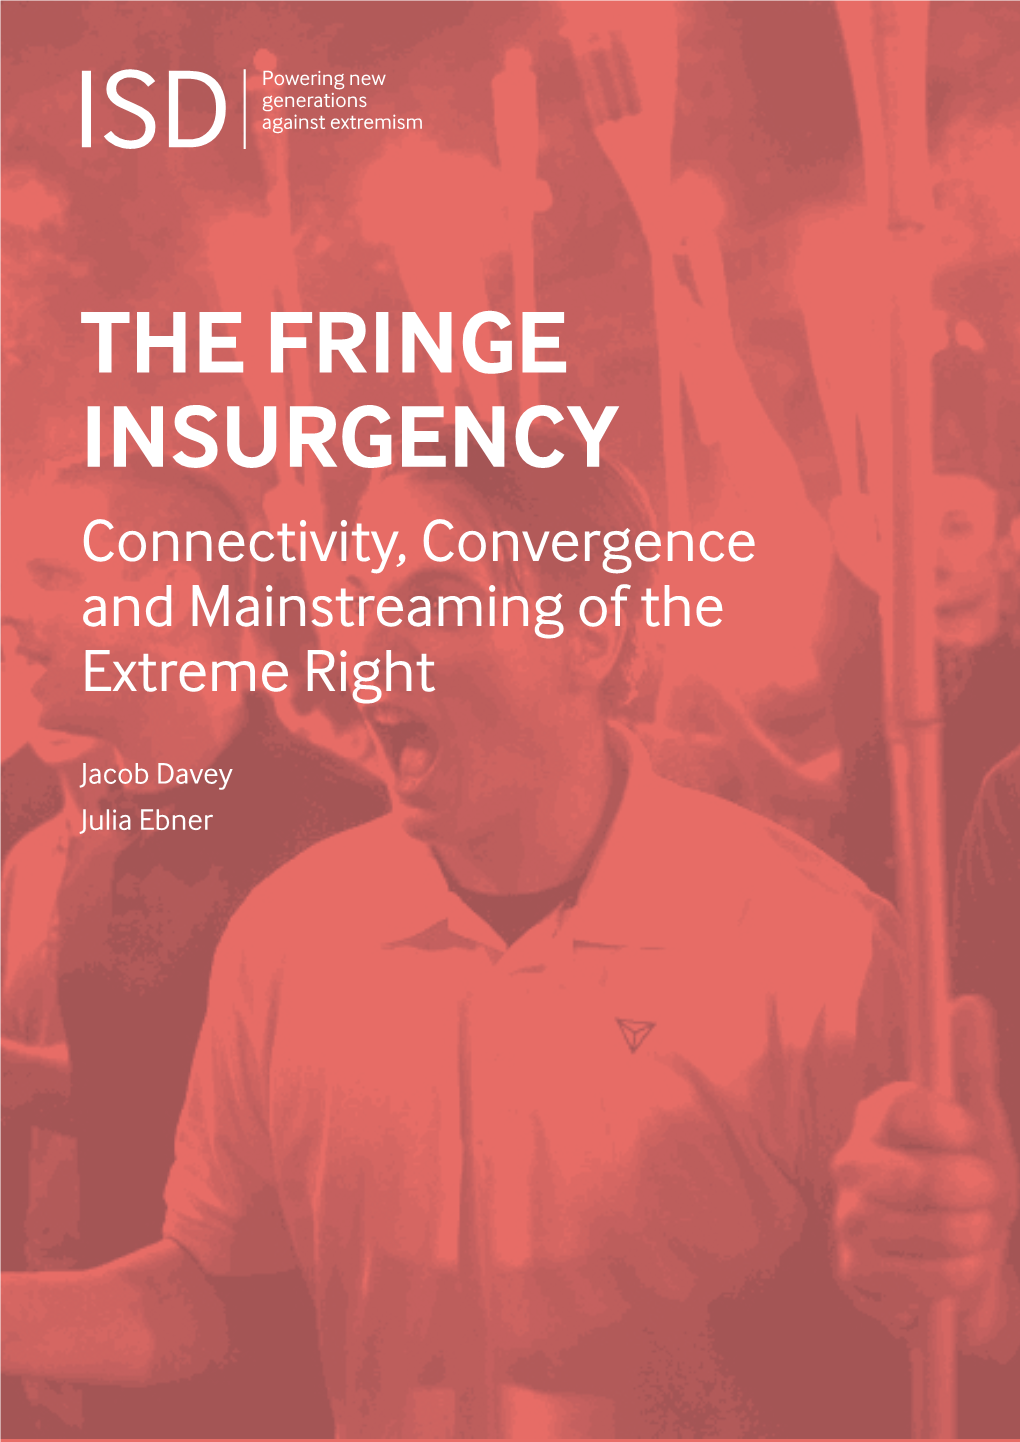 THE FRINGE INSURGENCY Connectivity, Convergence and Mainstreaming of the Extreme Right